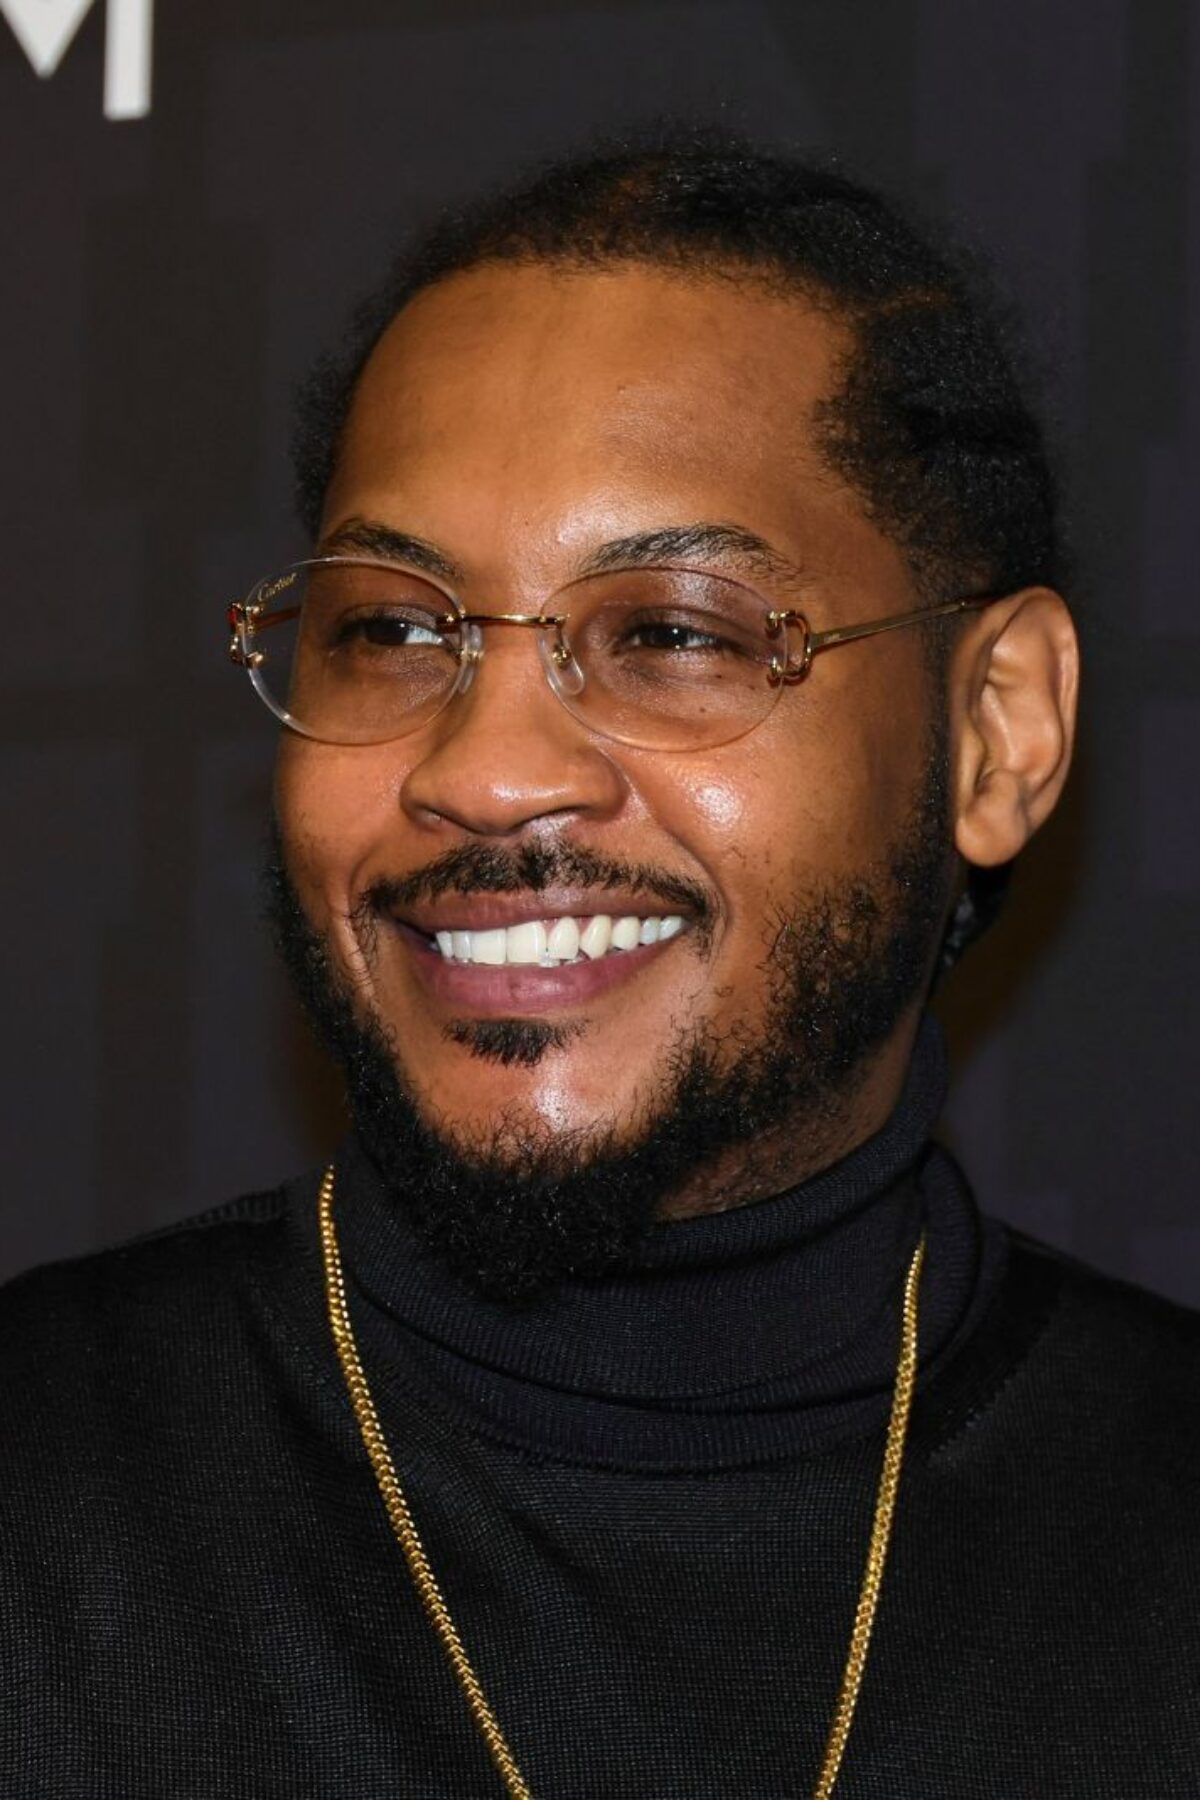 NEW YORK, NEW YORK - NOVEMBER 30: Carmelo Anthony attends the 36th Annual Footwear News Achievement Awards at Cipriani South Street on November 30, 2022 in New York City. (Photo by Theo Wargo/Getty Images)